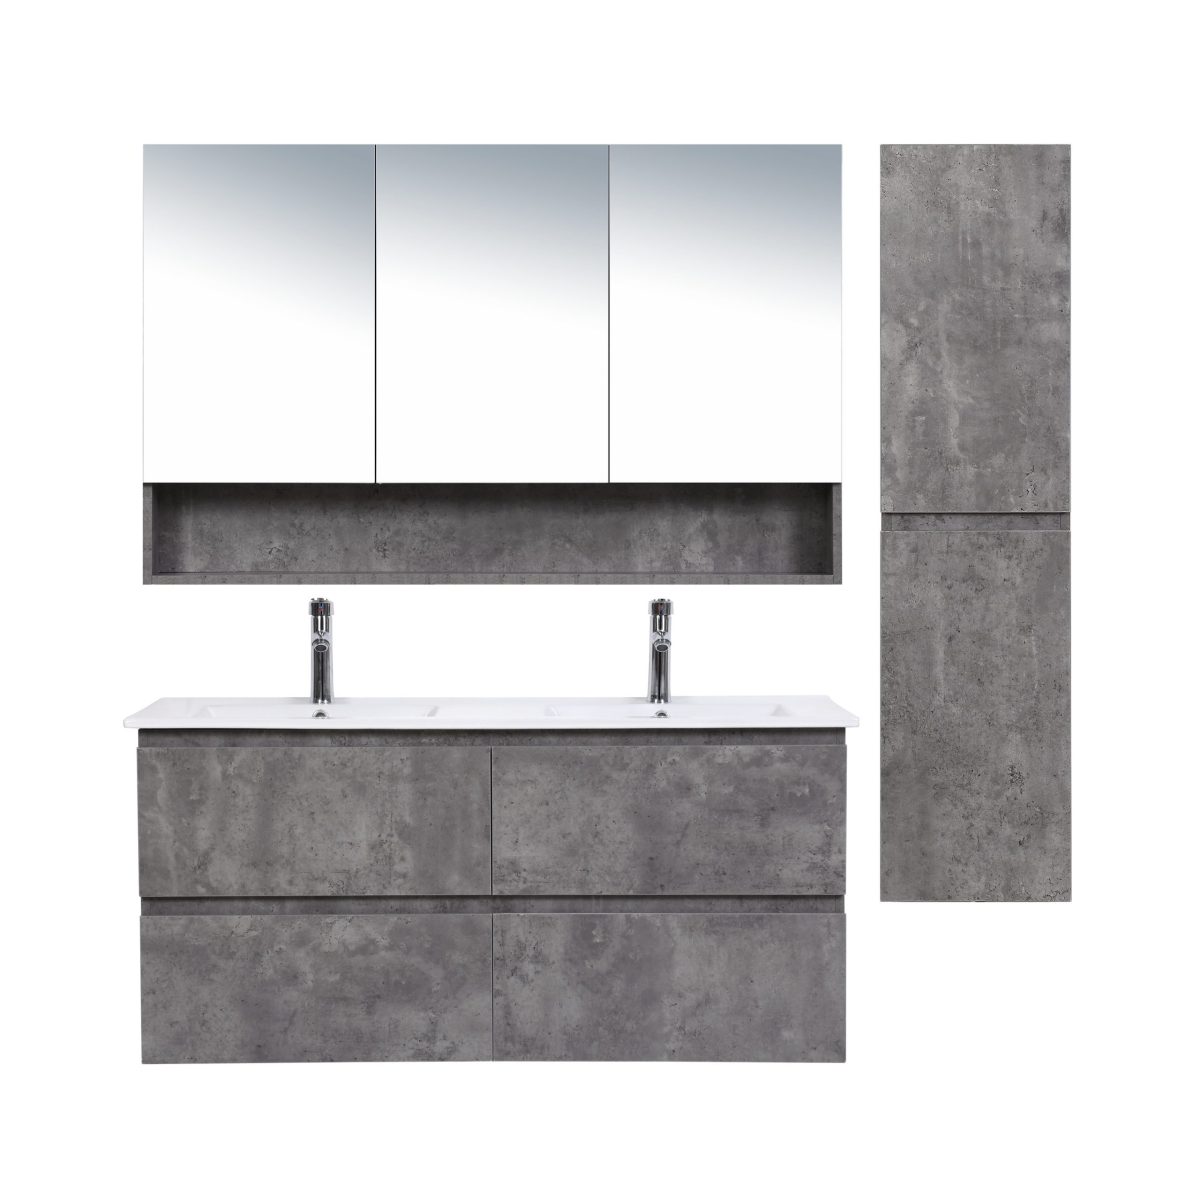 UNICASA LU-1200-RC LUNA WALL-HUNG VANITY WITH CERAMIC BASIN / CABINET ONLY (ROCK CEMENTO)